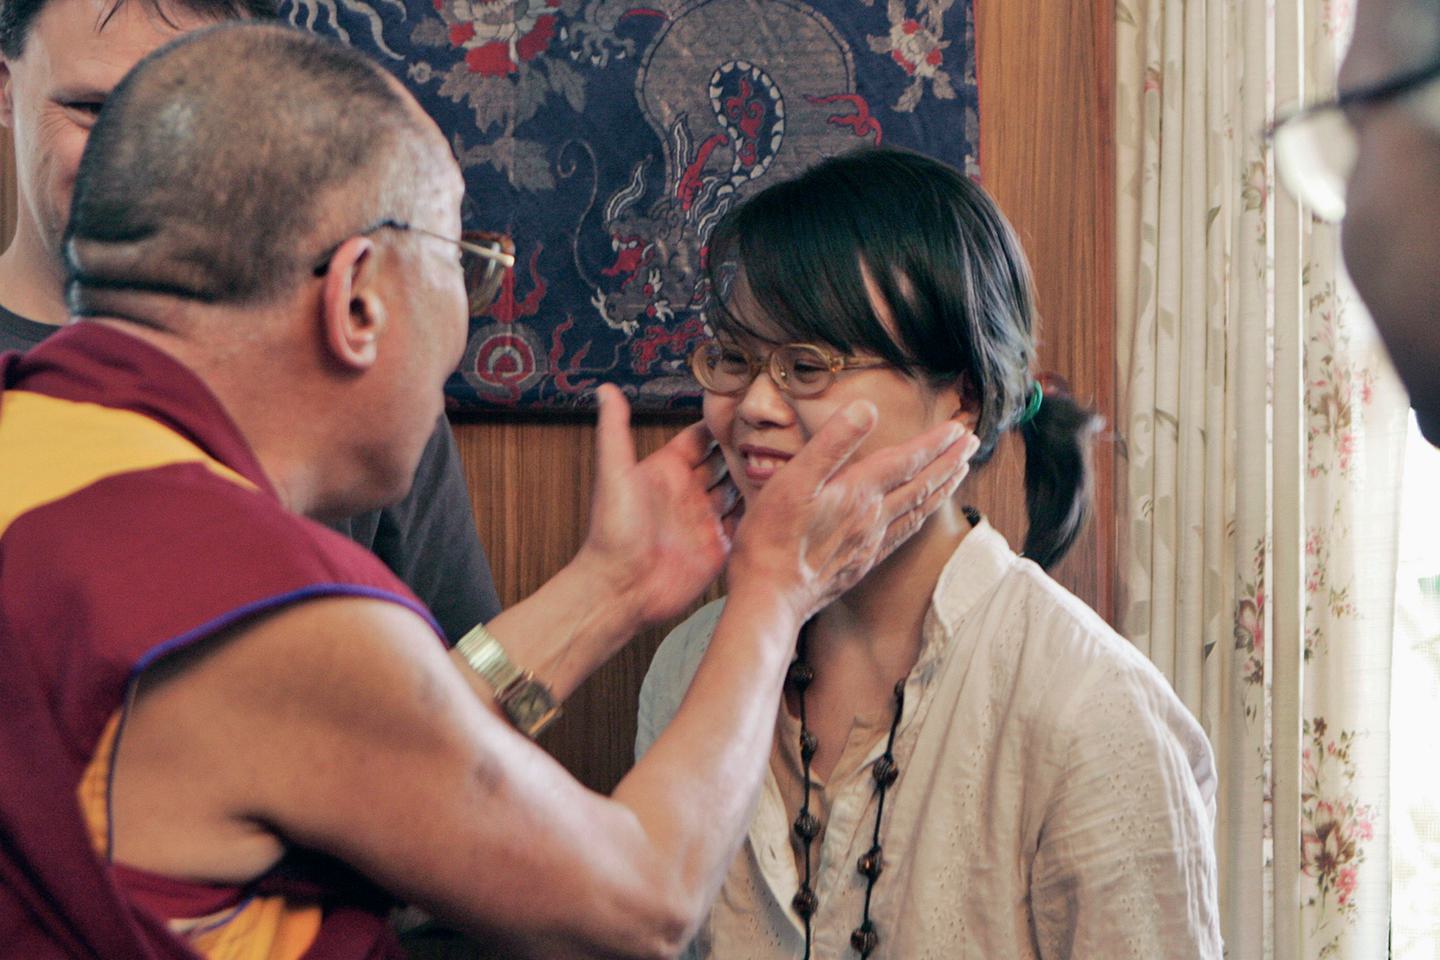 The Dalai Lama holds Amy Yee’s face in his hands as Yee laughs